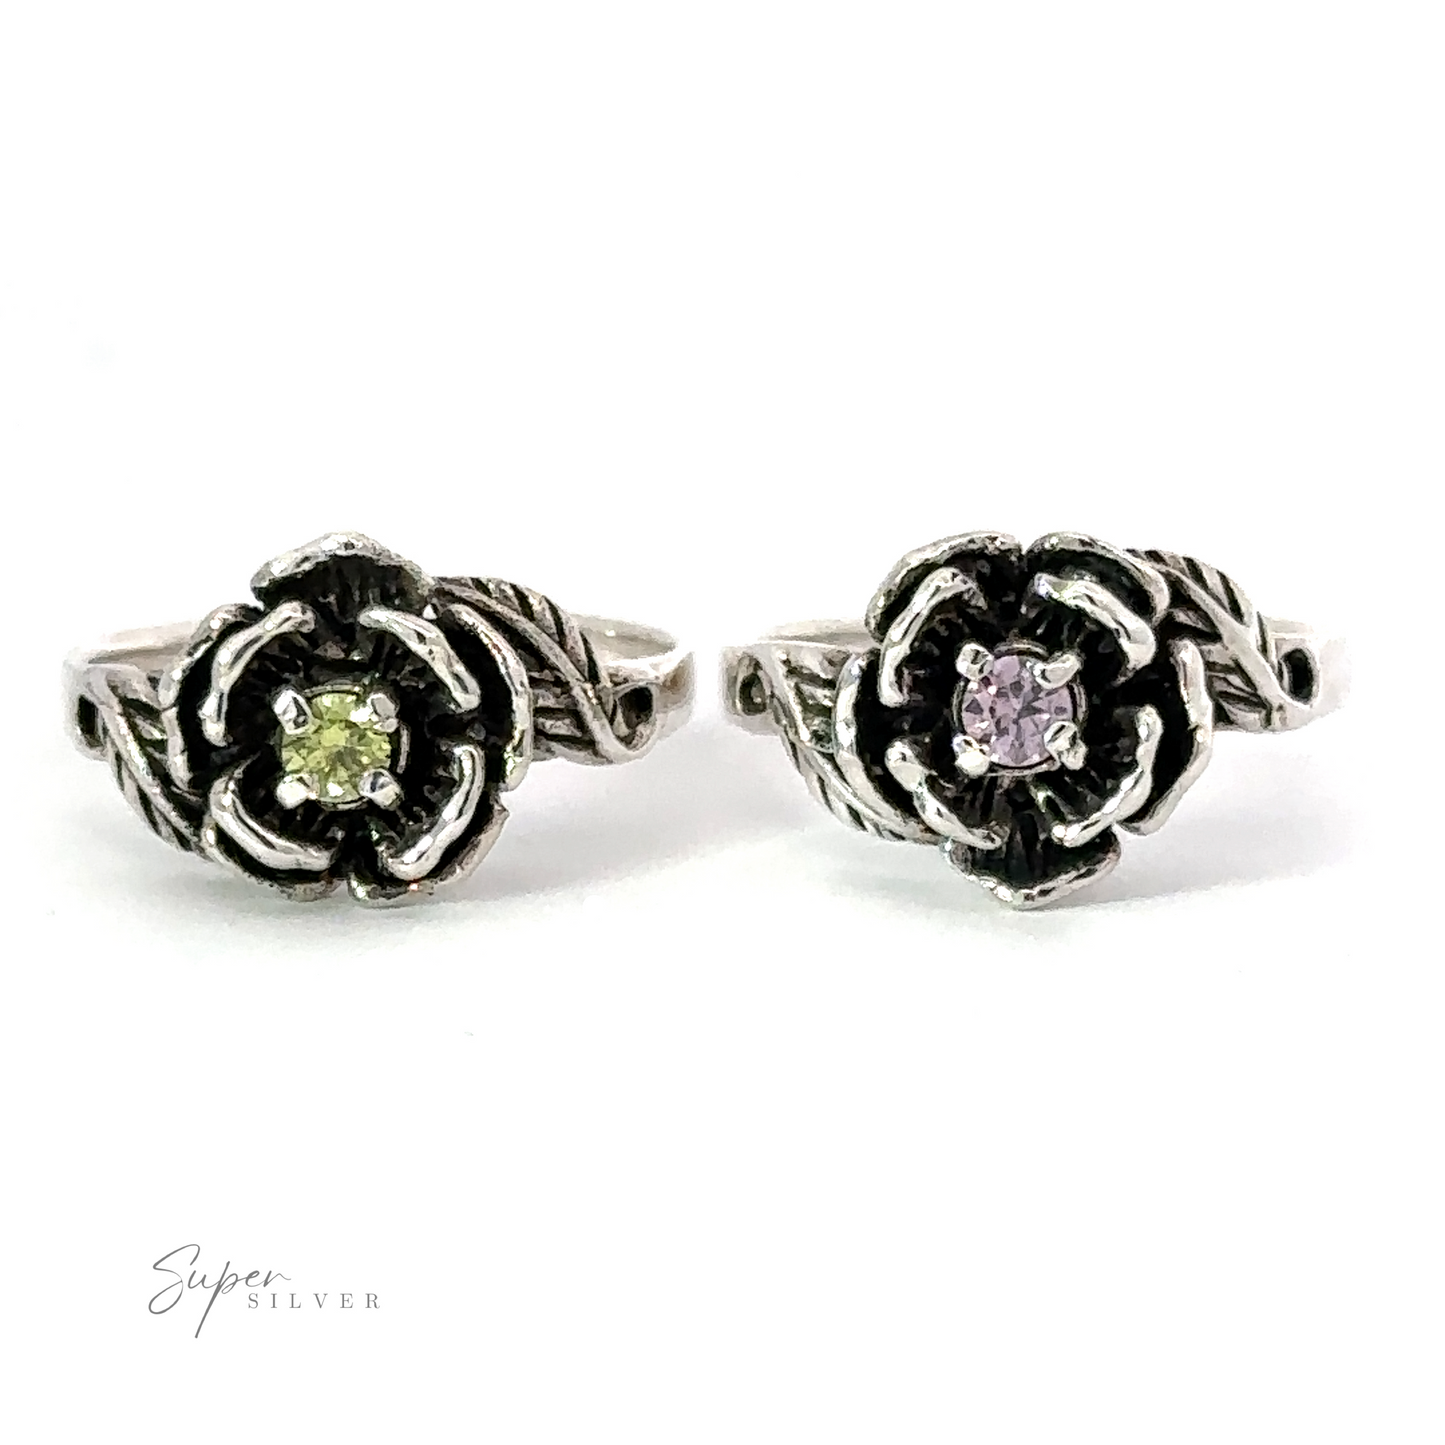 Two floral-shaped sterling silver Rose Rings With Cubic Zirconia Stone feature a central green gemstone on the left ring and a central purple gemstone on the right ring, both with intricate band designs. The small stones are crafted to sparkle like Cubic Zirconia. Logo text reads "Super Silver.